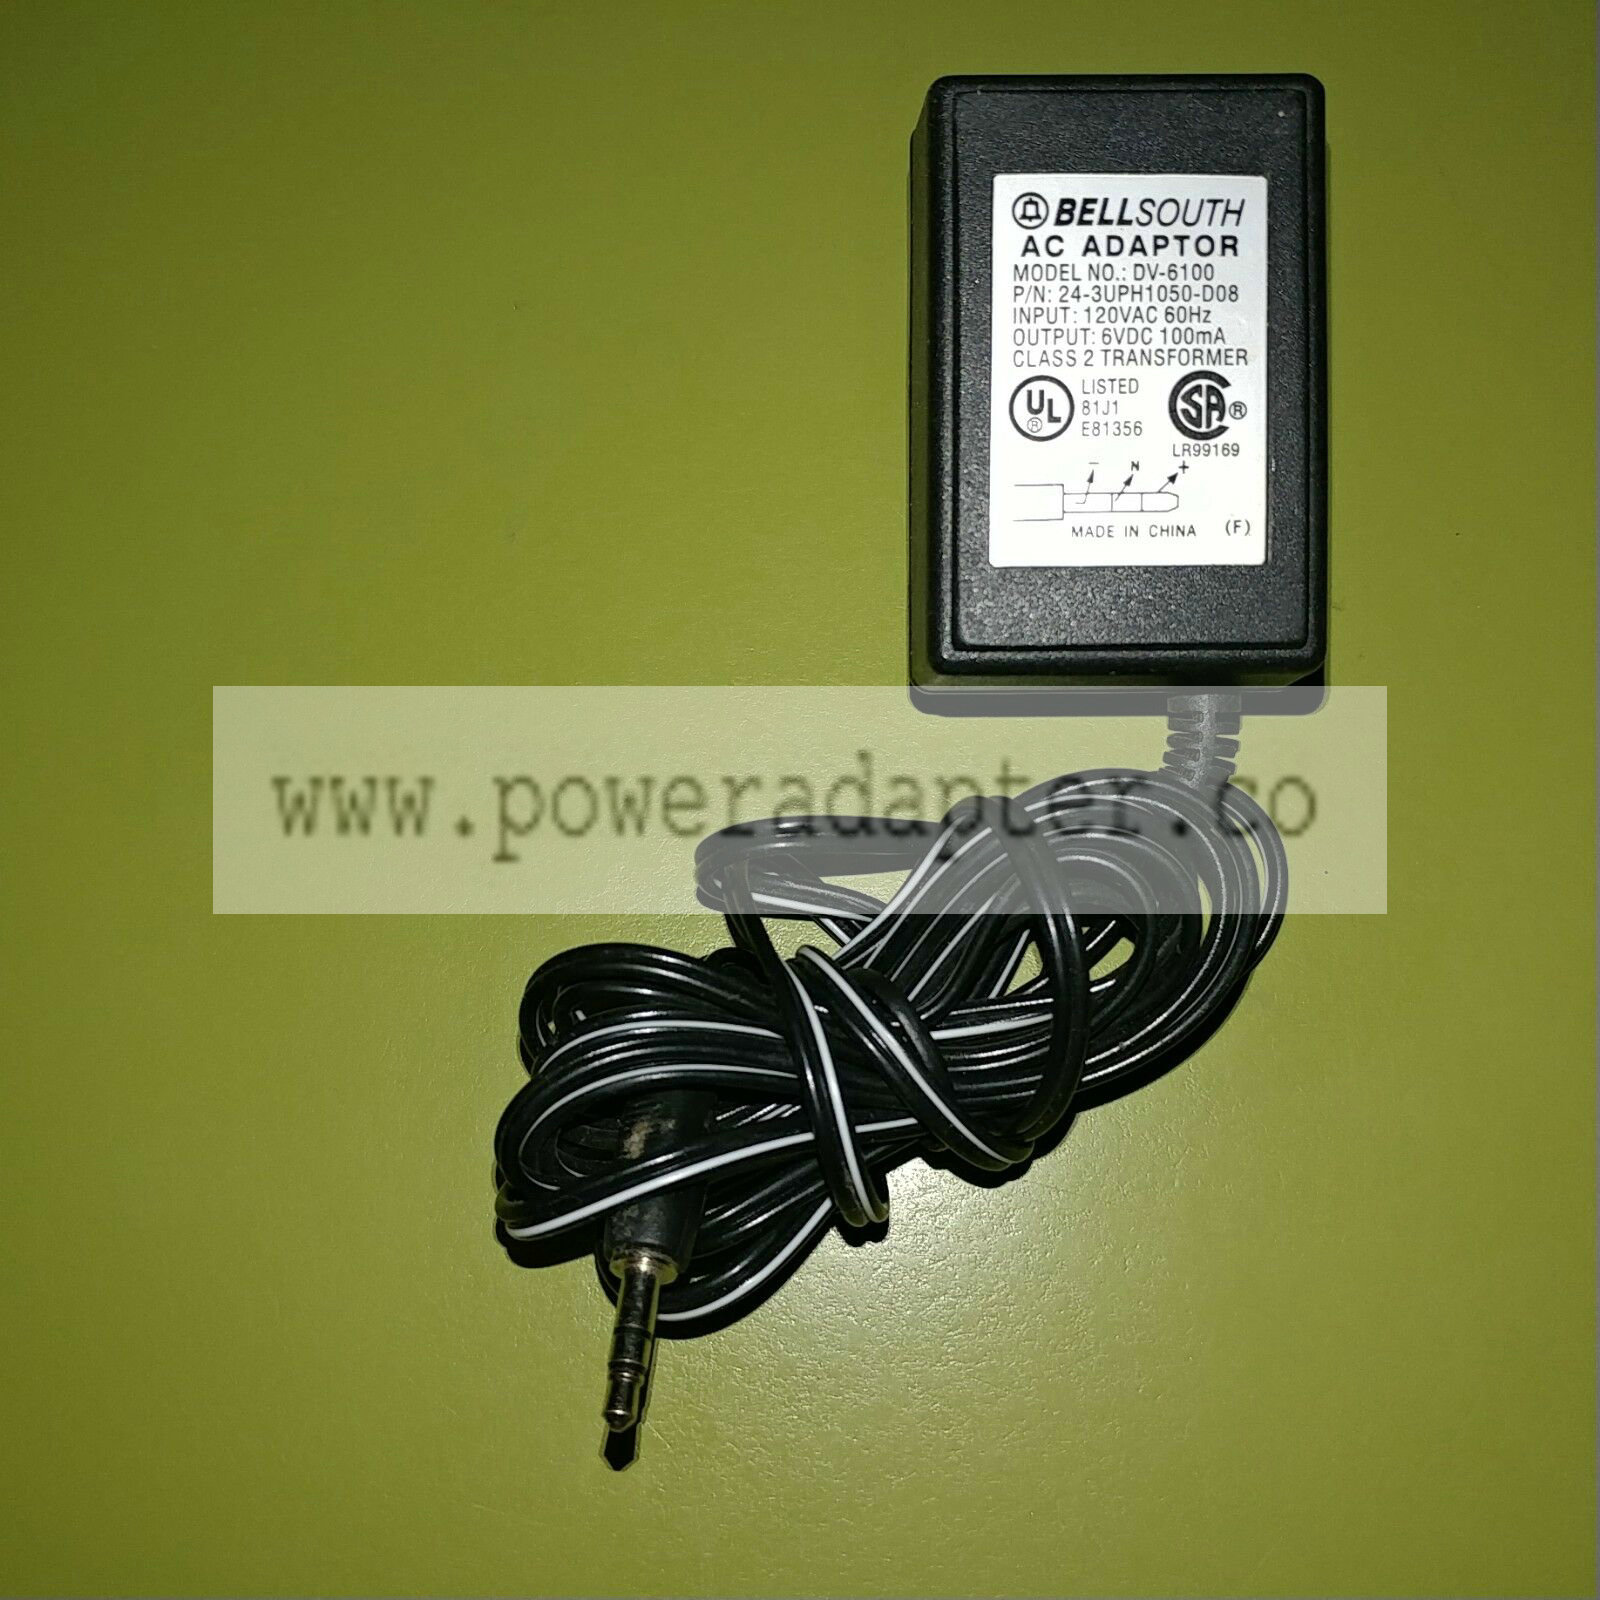 Genuine BELLSOUTH AC Adapter Power Supply Model DV-6100 6VDC 100mA Brand: Bell South Output Voltage: 6 V MPN: Does